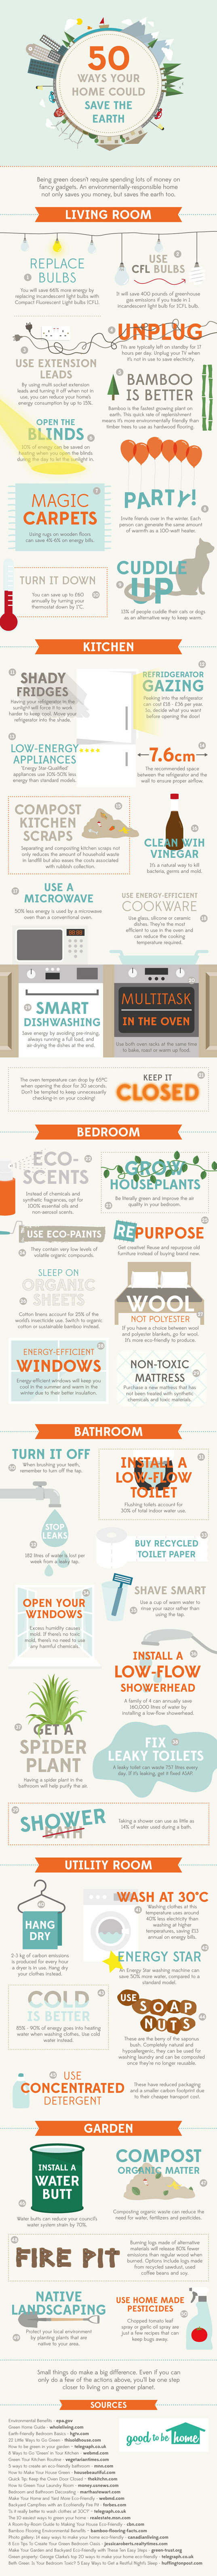 50 ways your home could save the earth